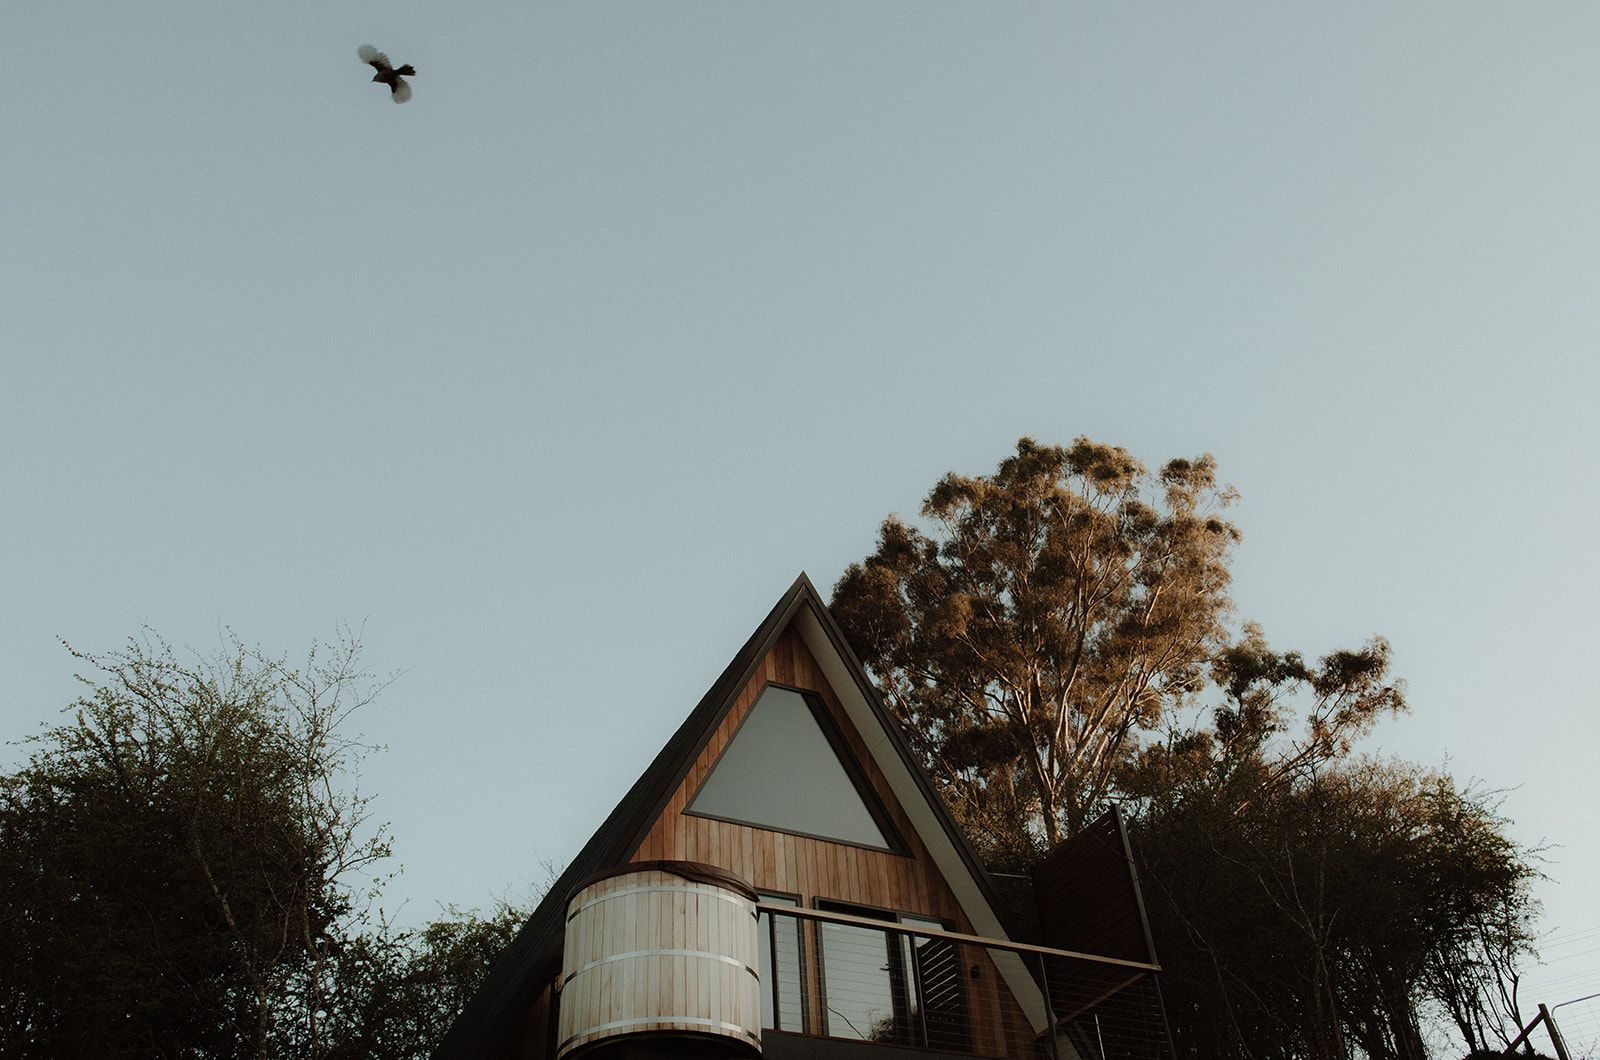 The Eco Cabin Tasmania by Wild Life Environmental. Ground floor view looking up at cabin